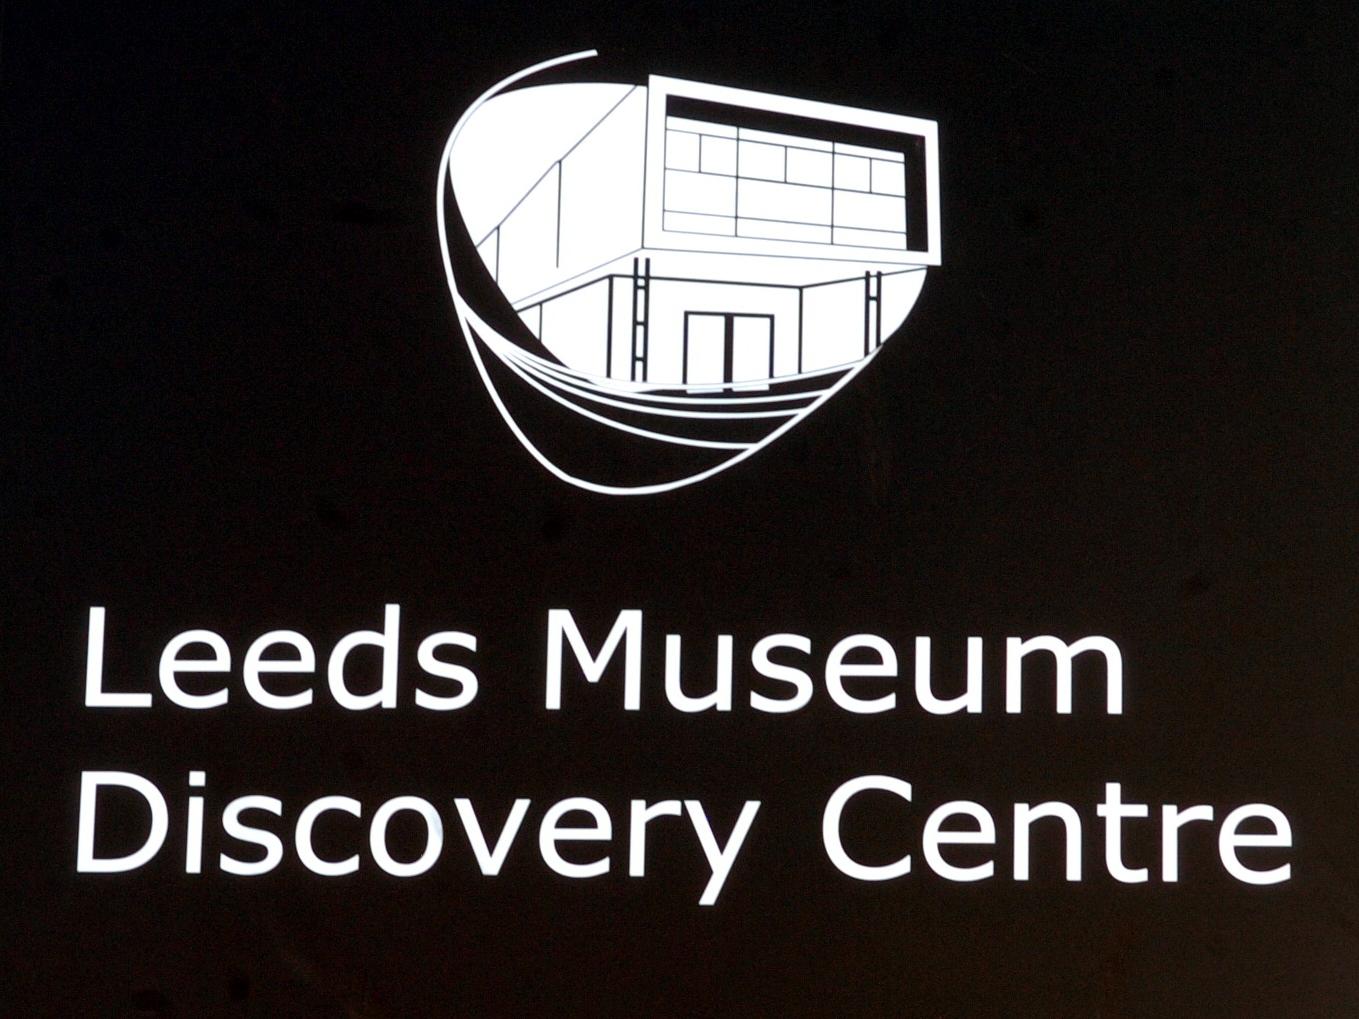 The Leeds Discovery Centre will welcome visitors to a special spooky behind-the-scenes tour on Oct 30 (10am-12pm) and (1pm-3pm). Free event but must be booked in advance on (0113) 3782100.